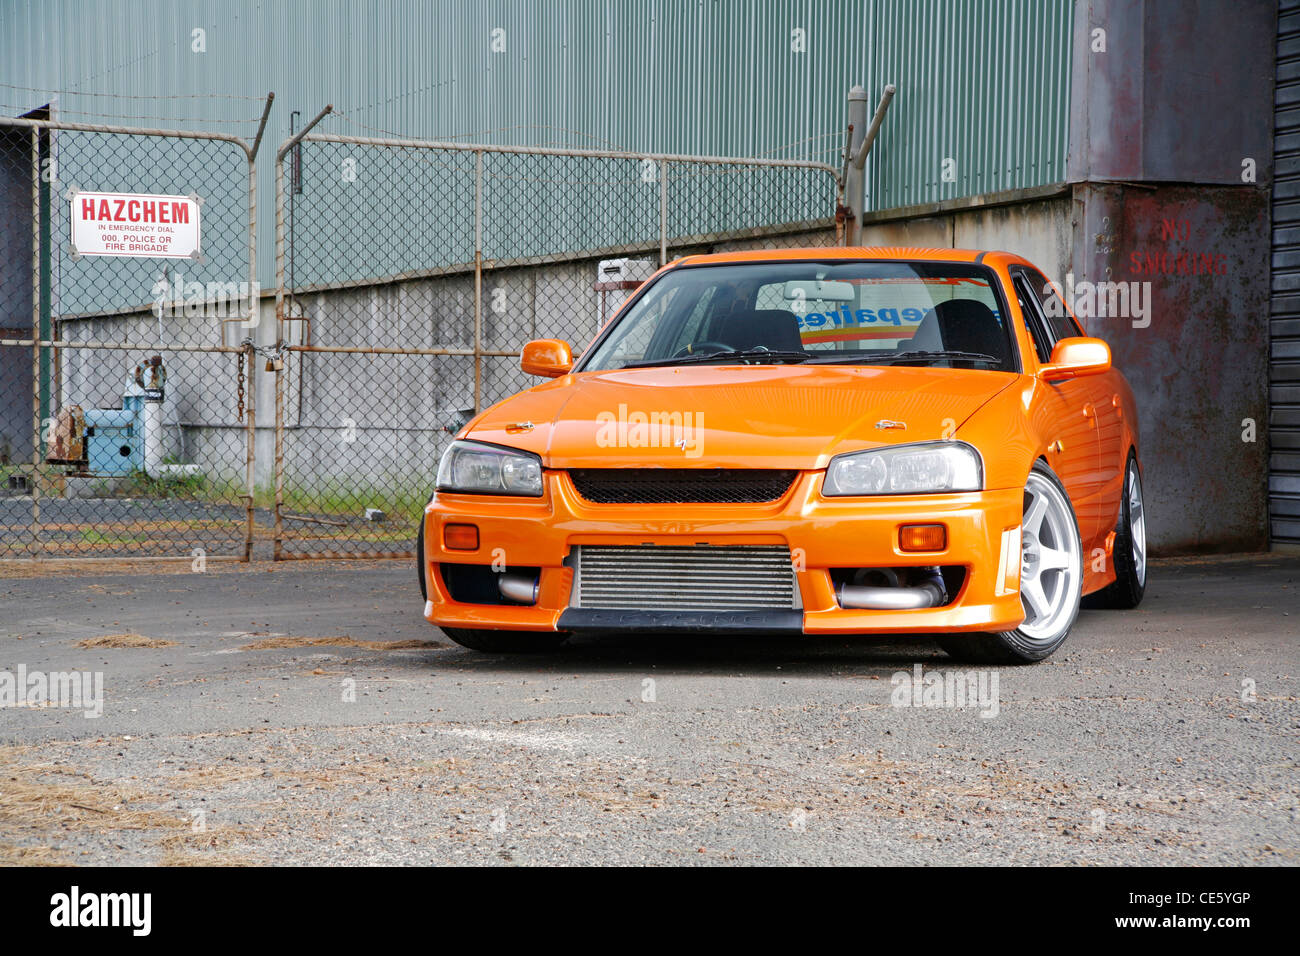 Nissan Skyline Gt R High Resolution Stock Photography And Images Alamy